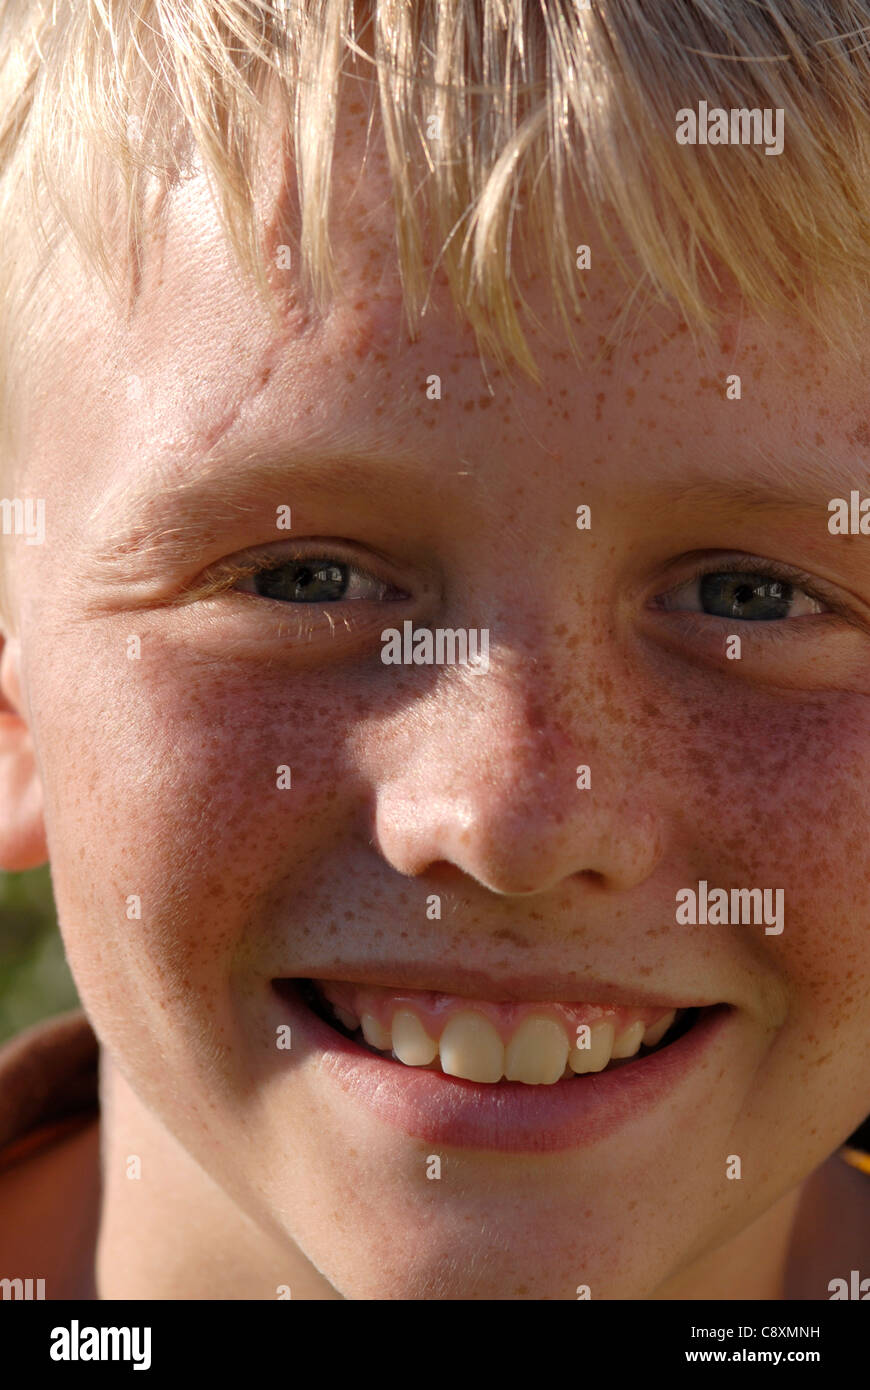 Head shot of a boy with blond hair and freckles Stock Photo - Alamy